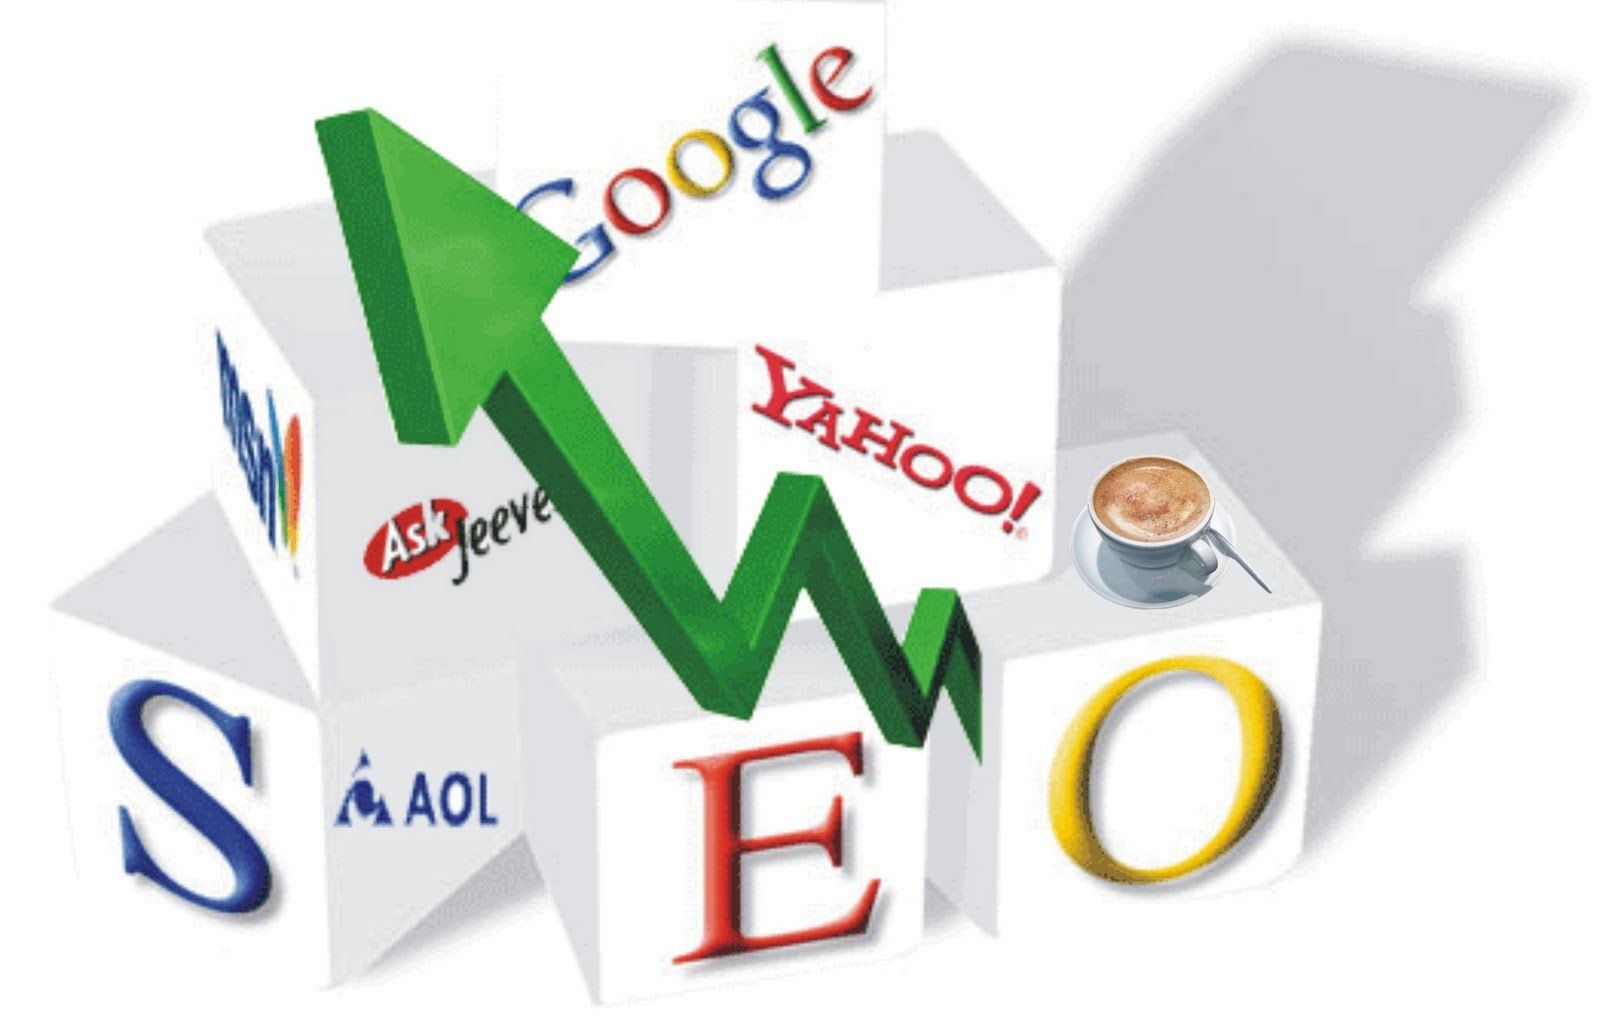 SEO - Search Engine optimation